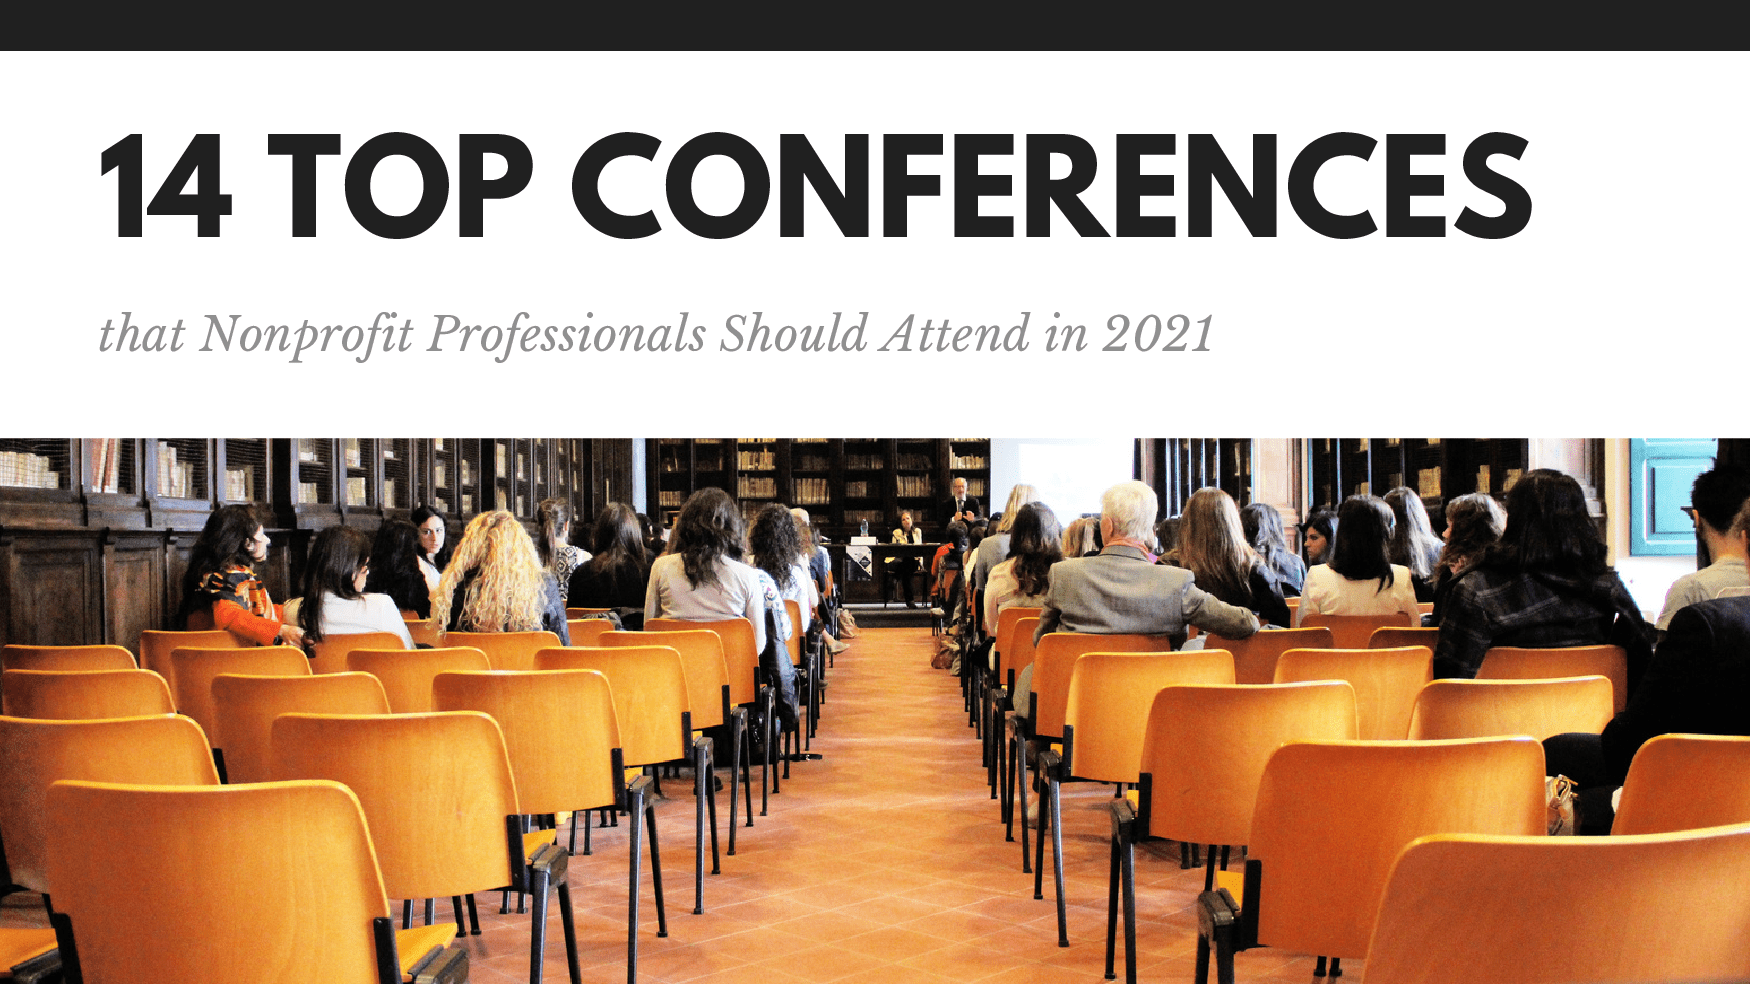 14 Top Conferences that Nonprofit Professionals Should Attend in 2021